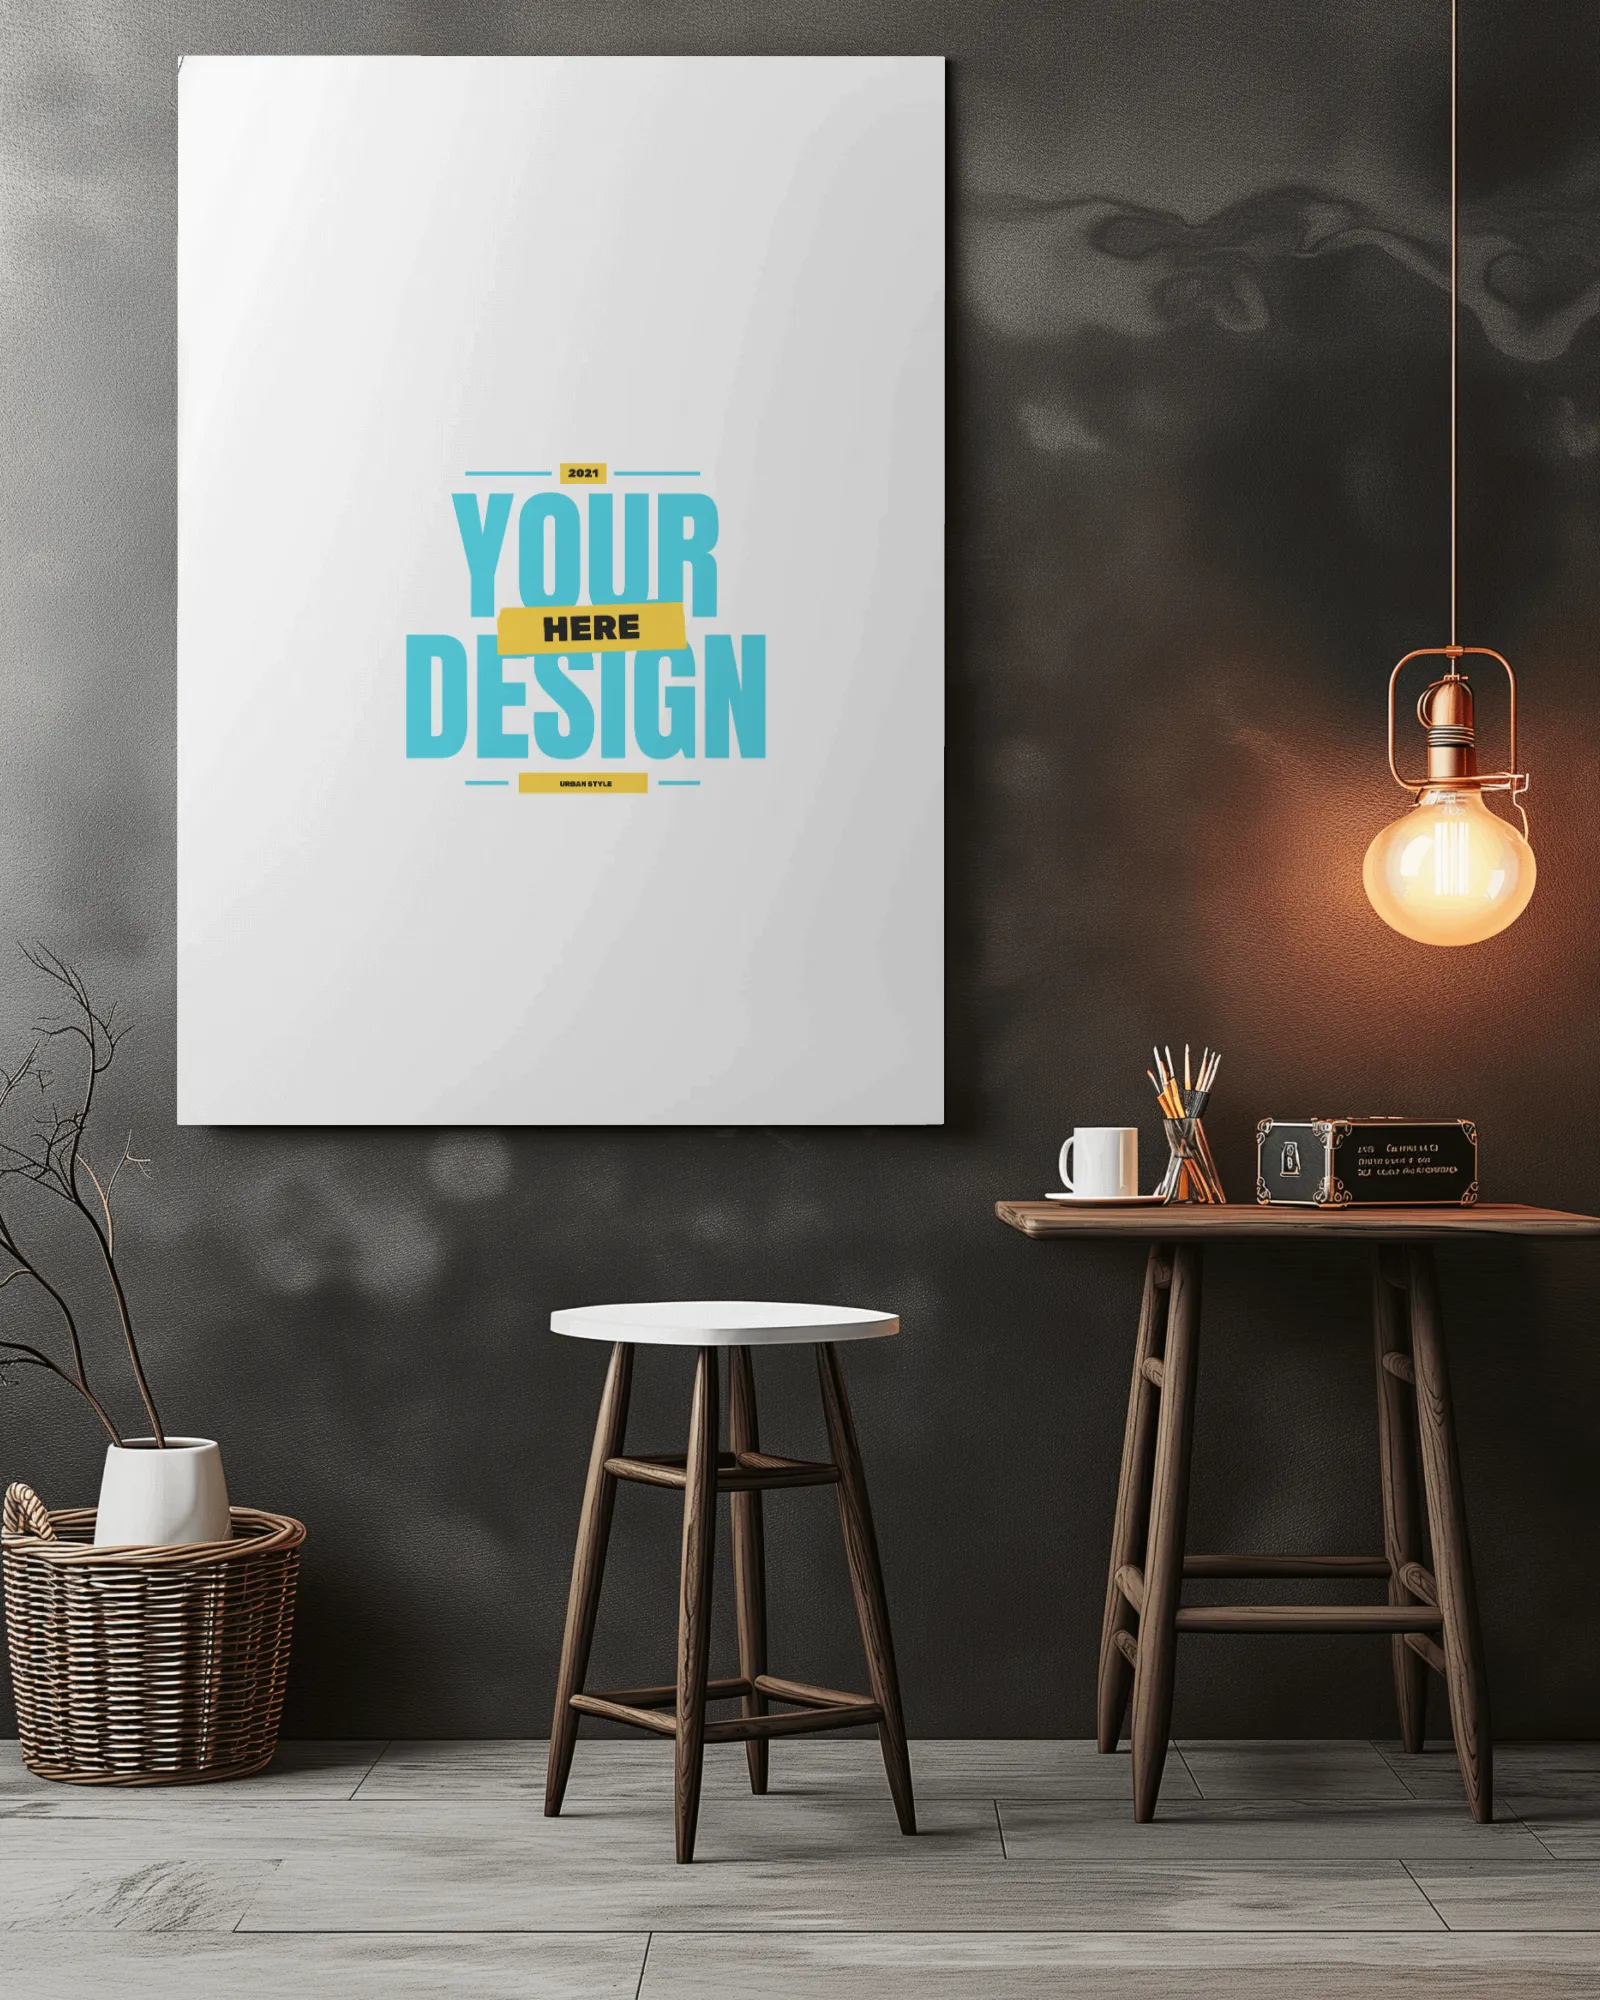 poster mockup on black wall with table and stool in room 